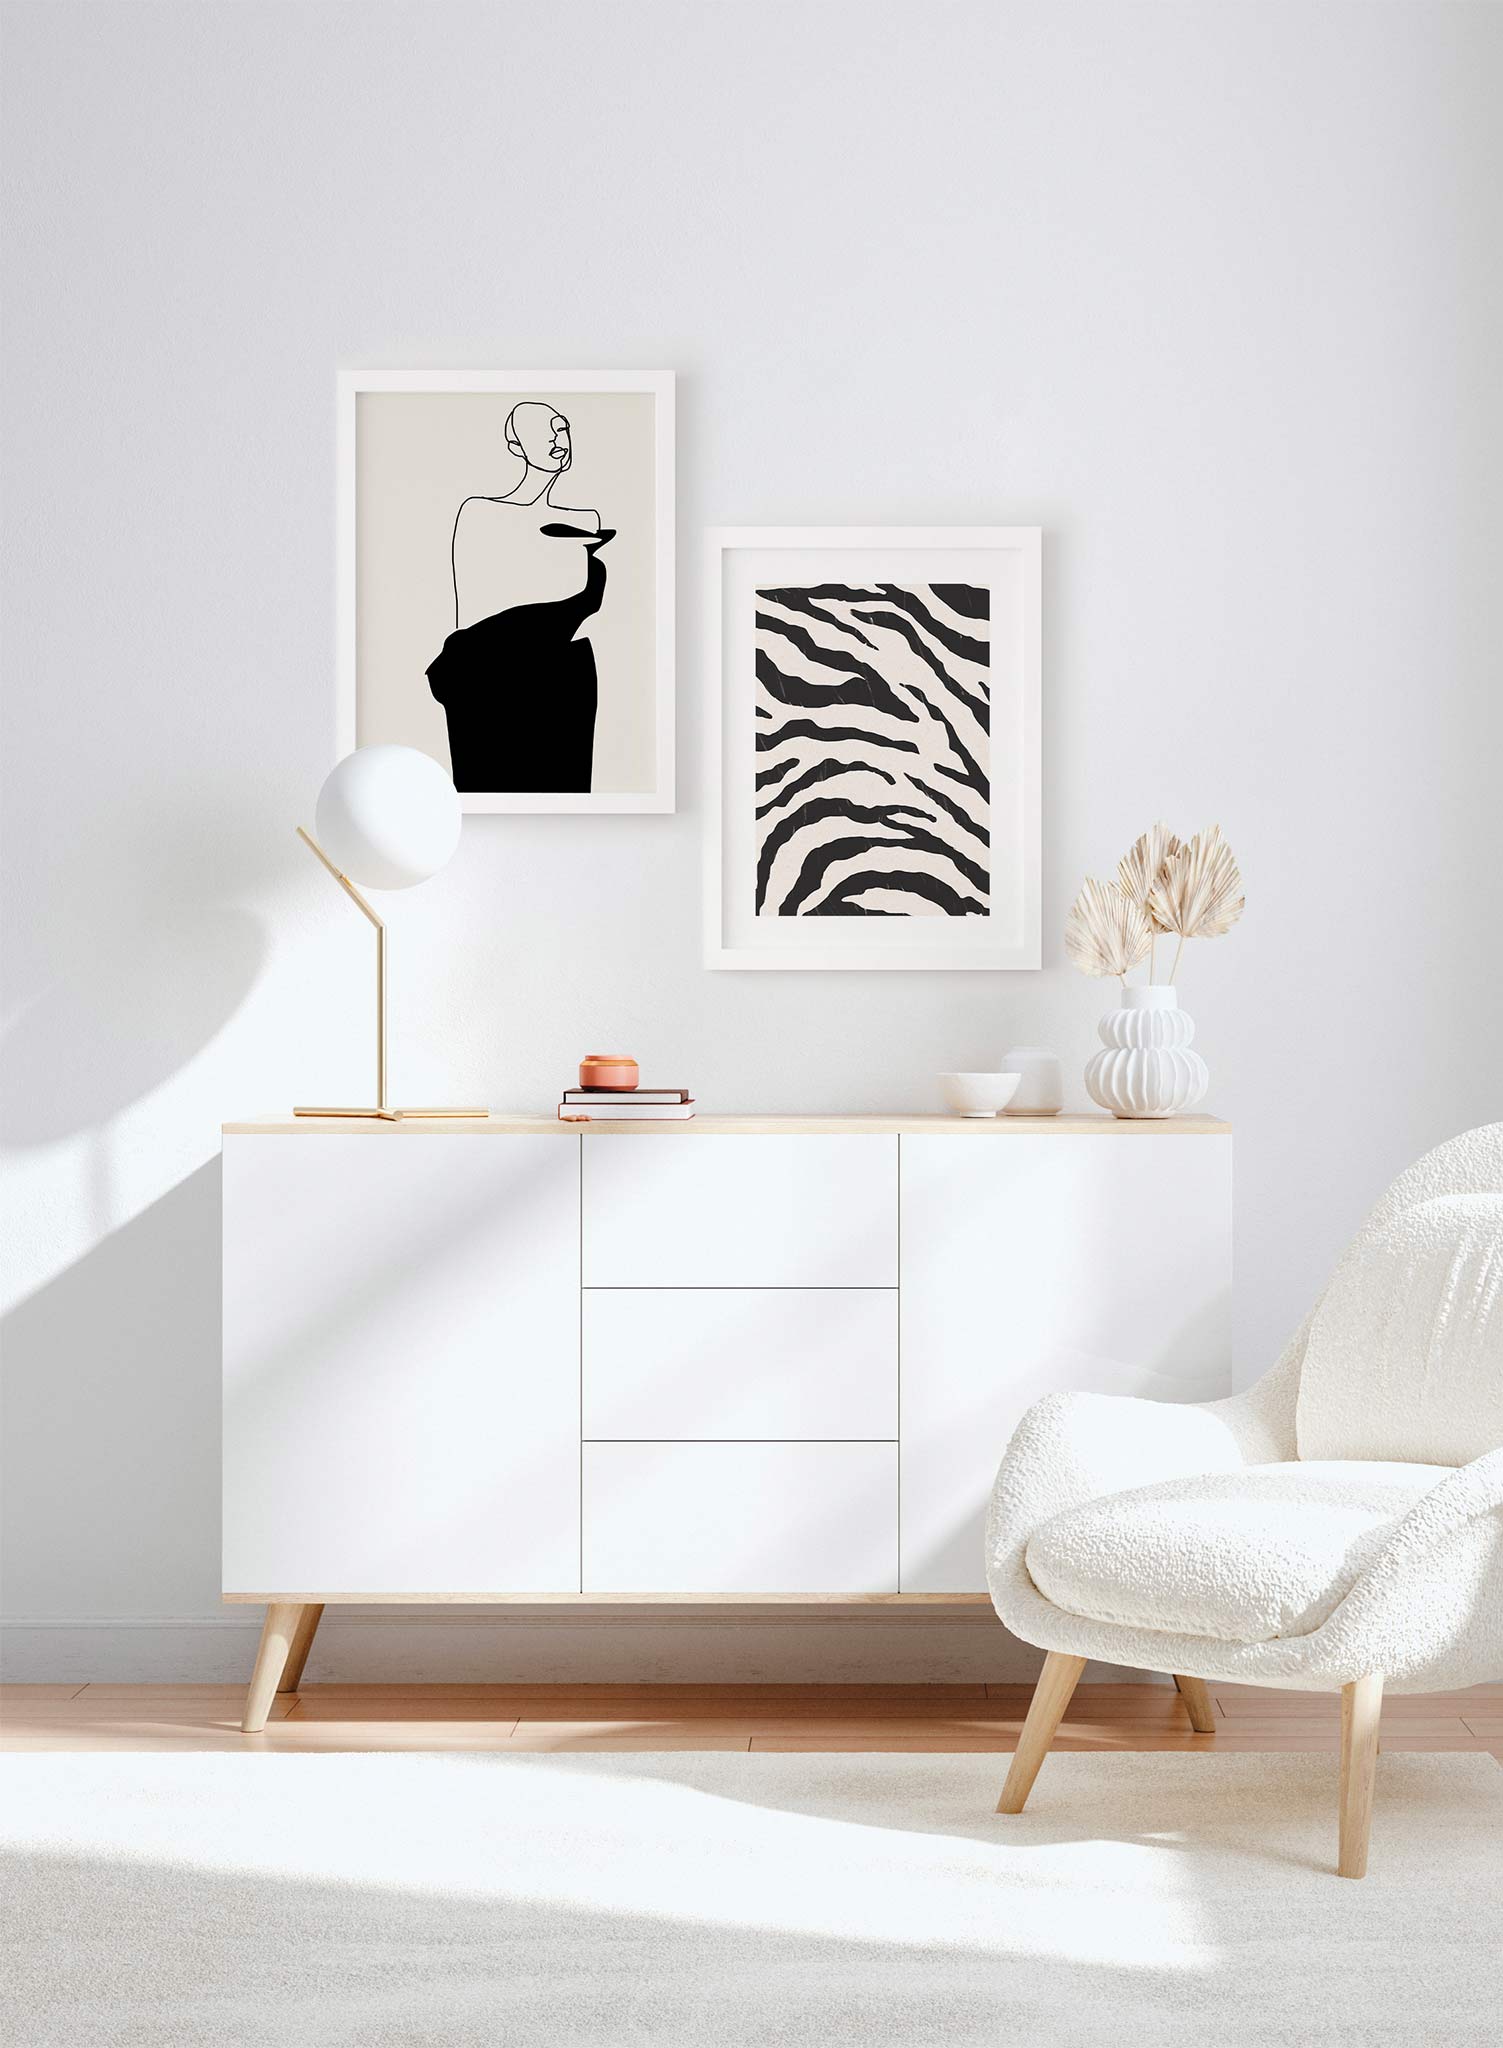 Zebra Print is a minimalist illustration of the close-up view of a zebra print by Opposite Wall.